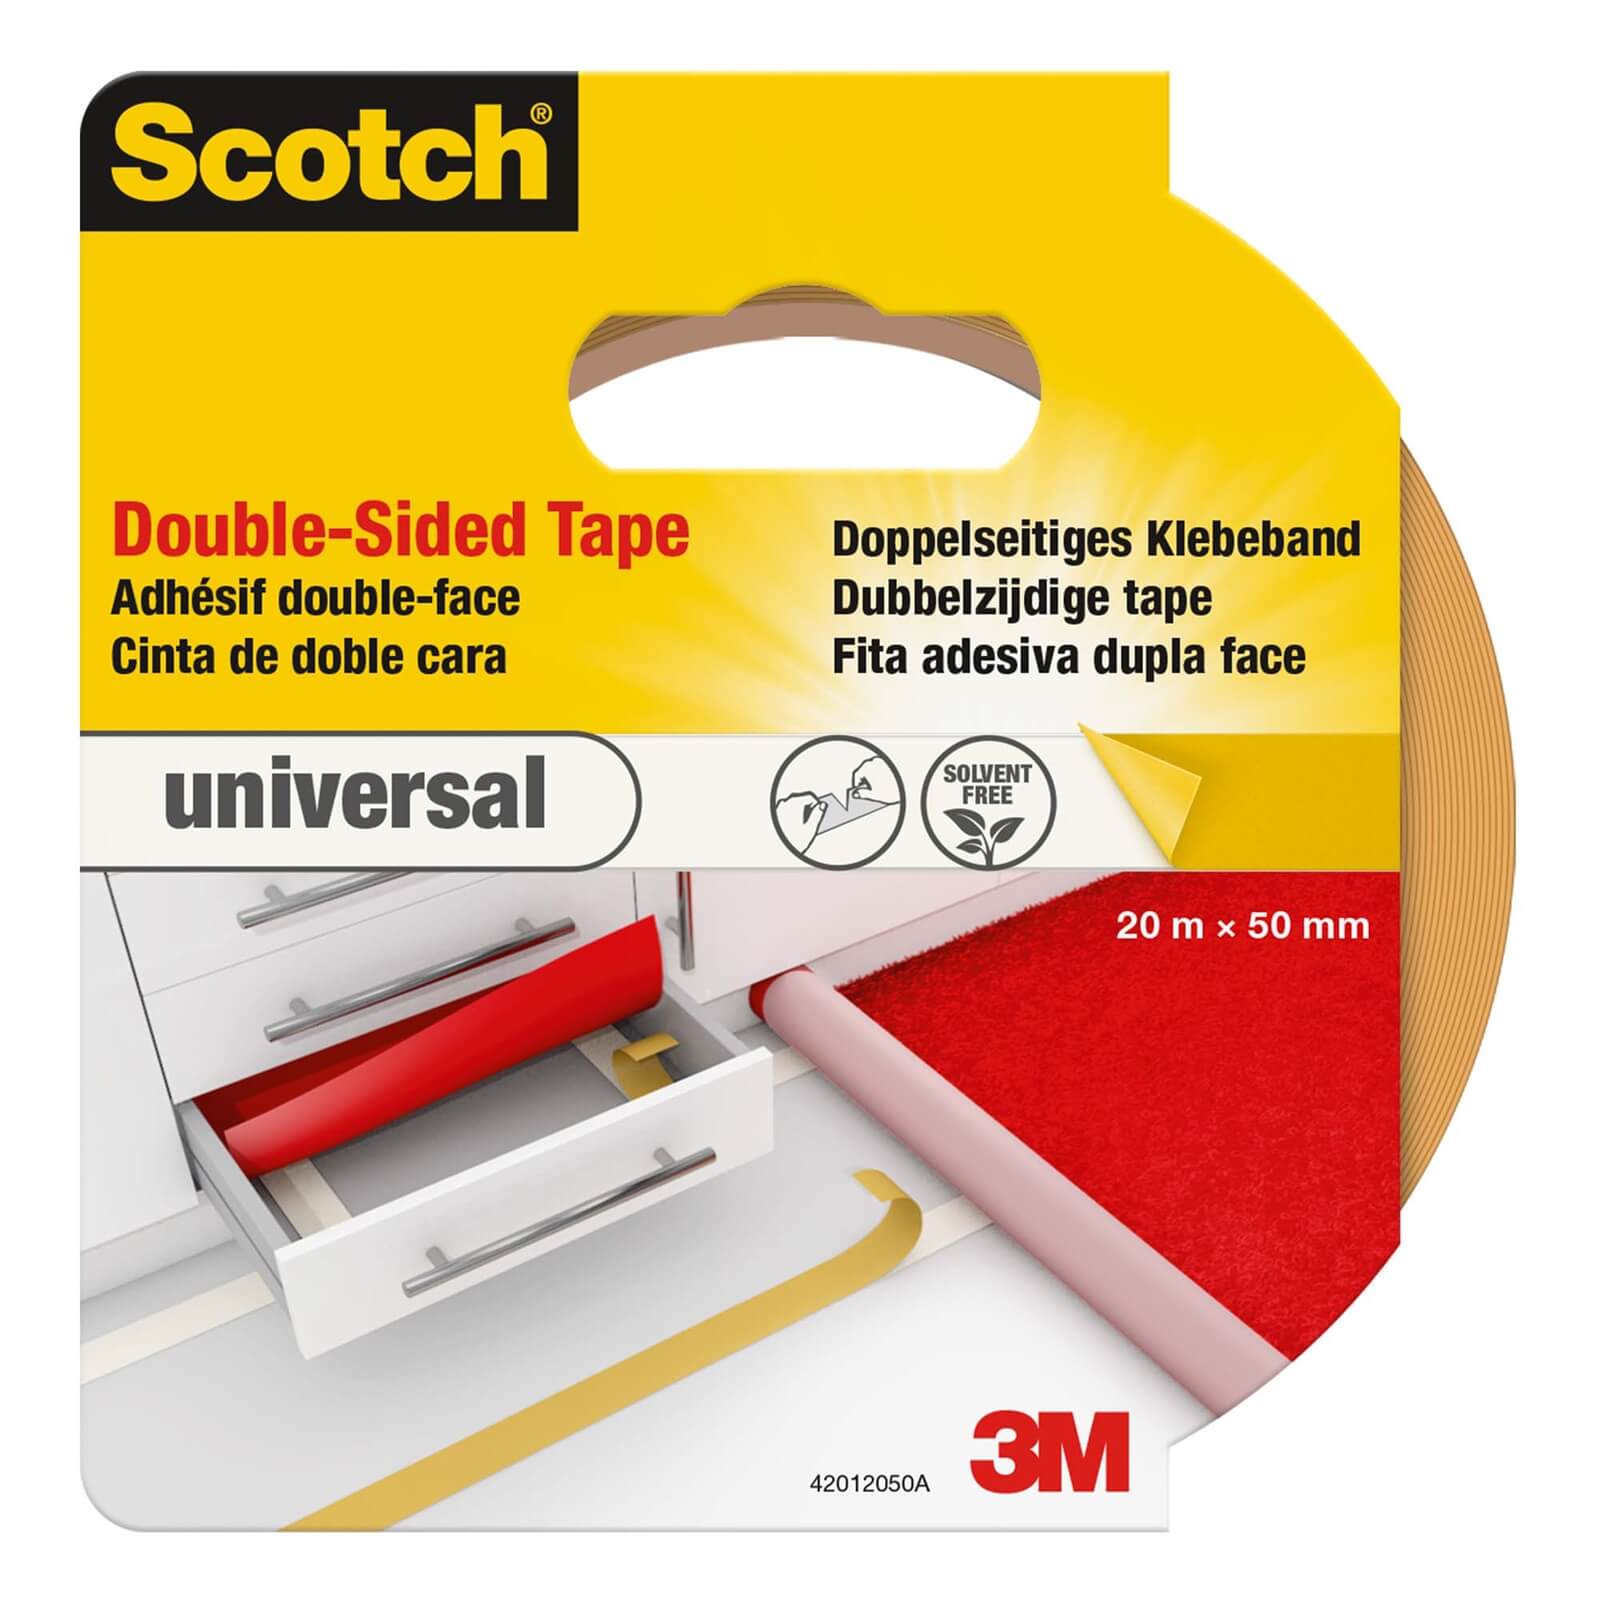 Scotch Double Sided Tape 20m x 50mm